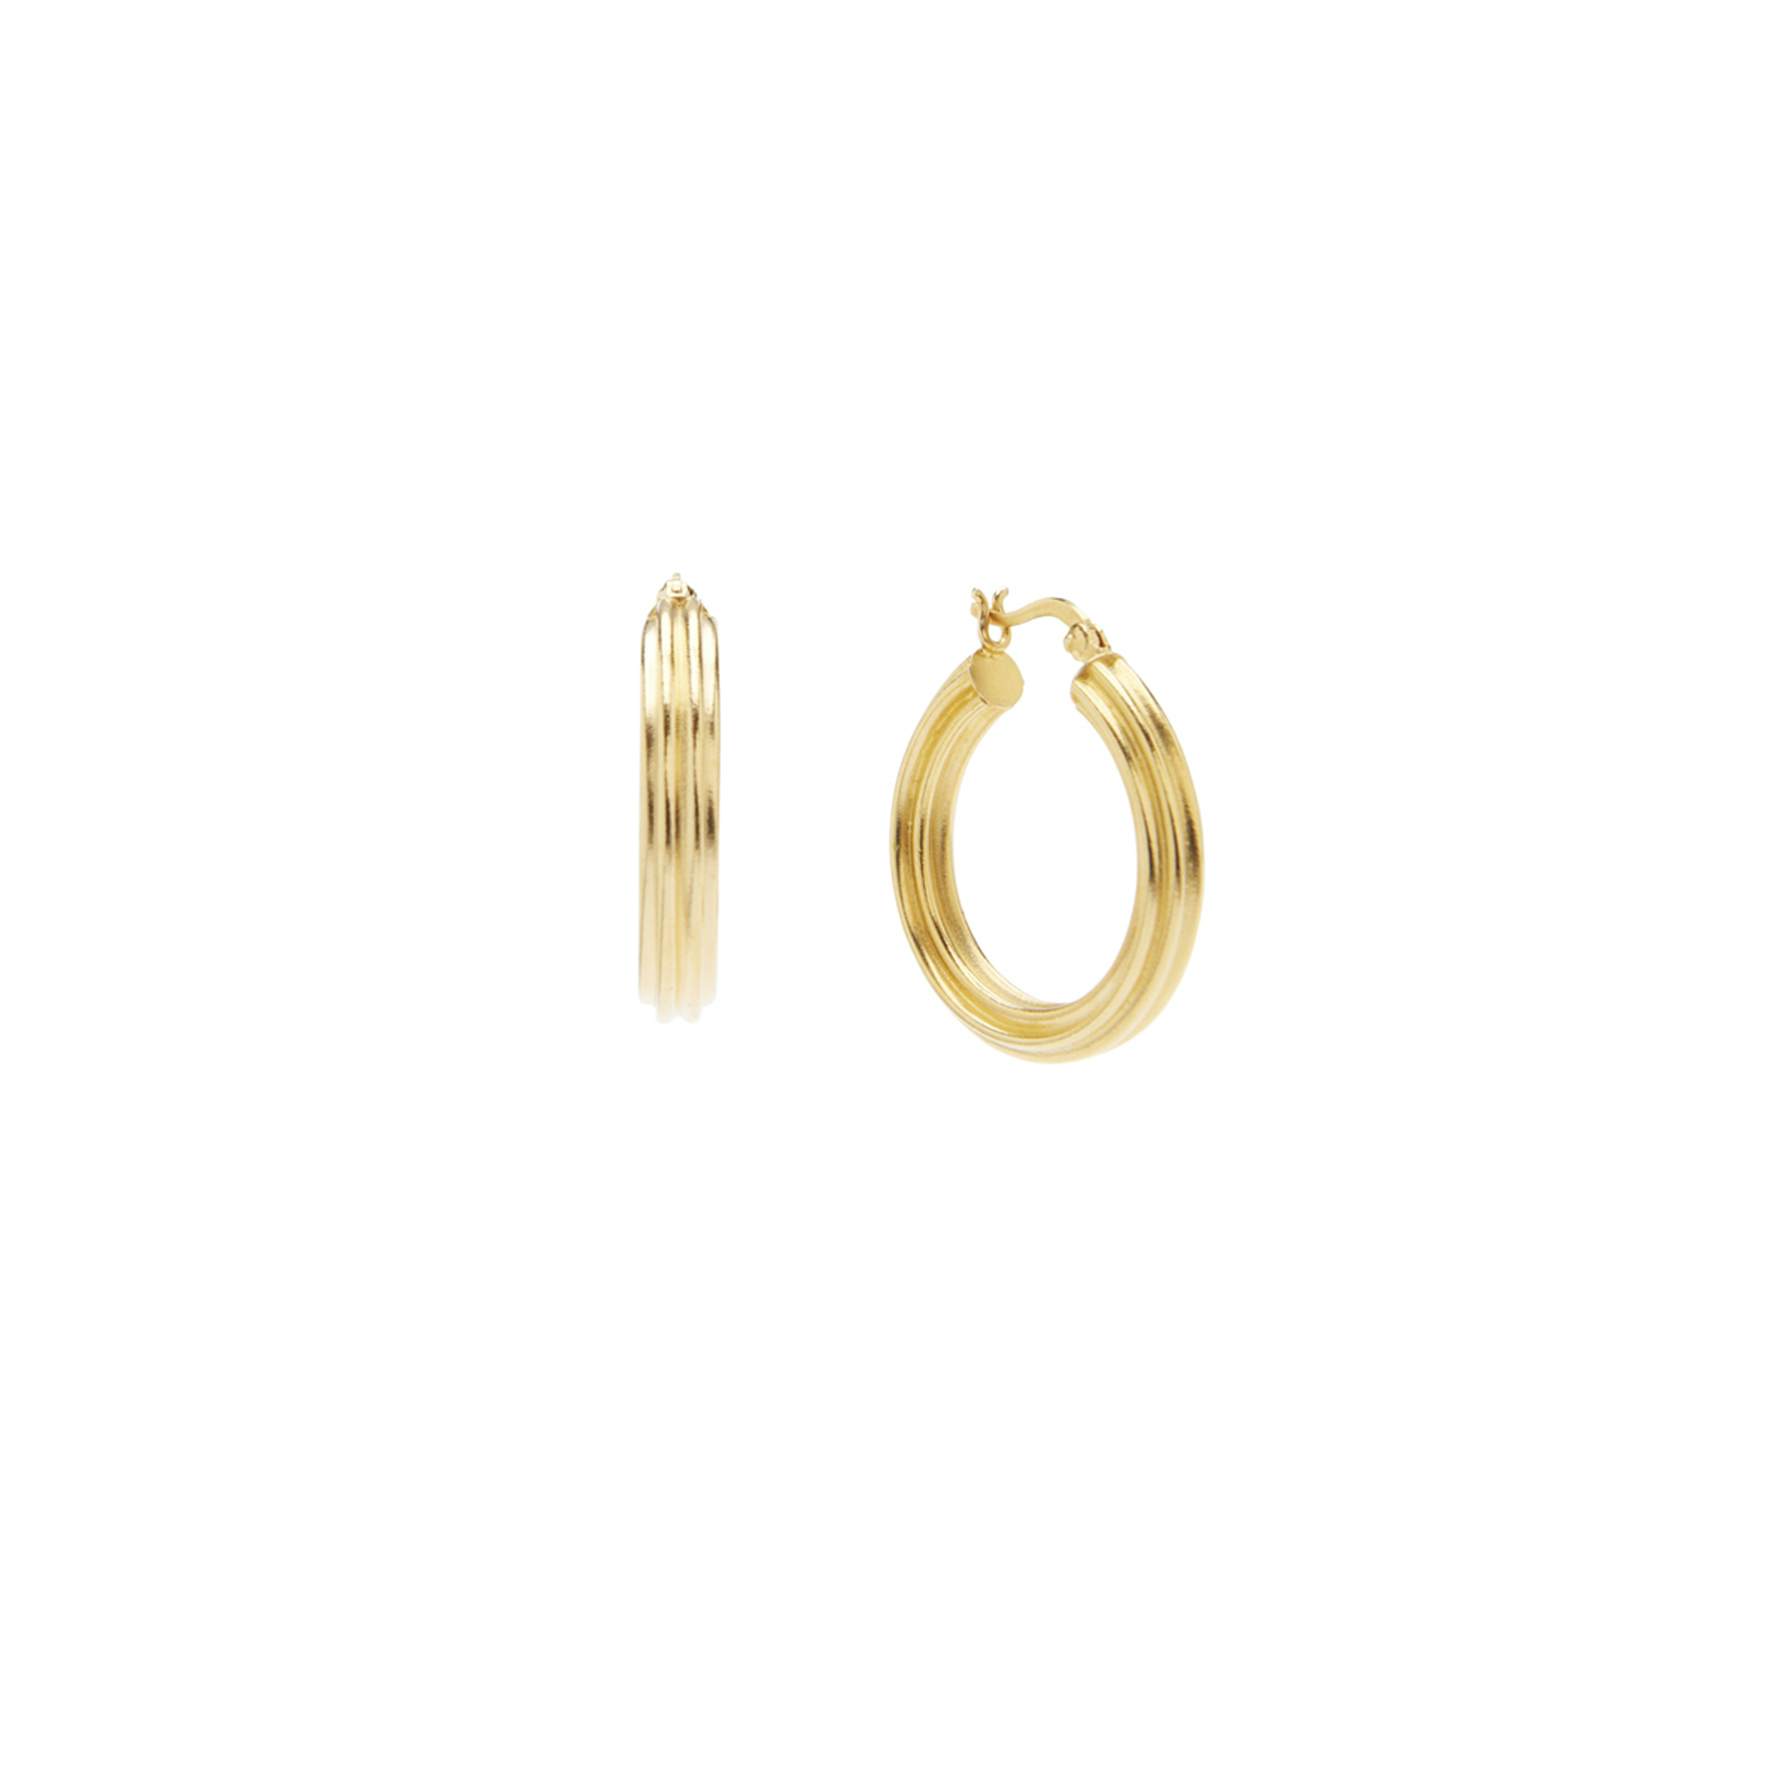 Cecilia Hoops from Pico in Goldplated-Silver Sterling 925